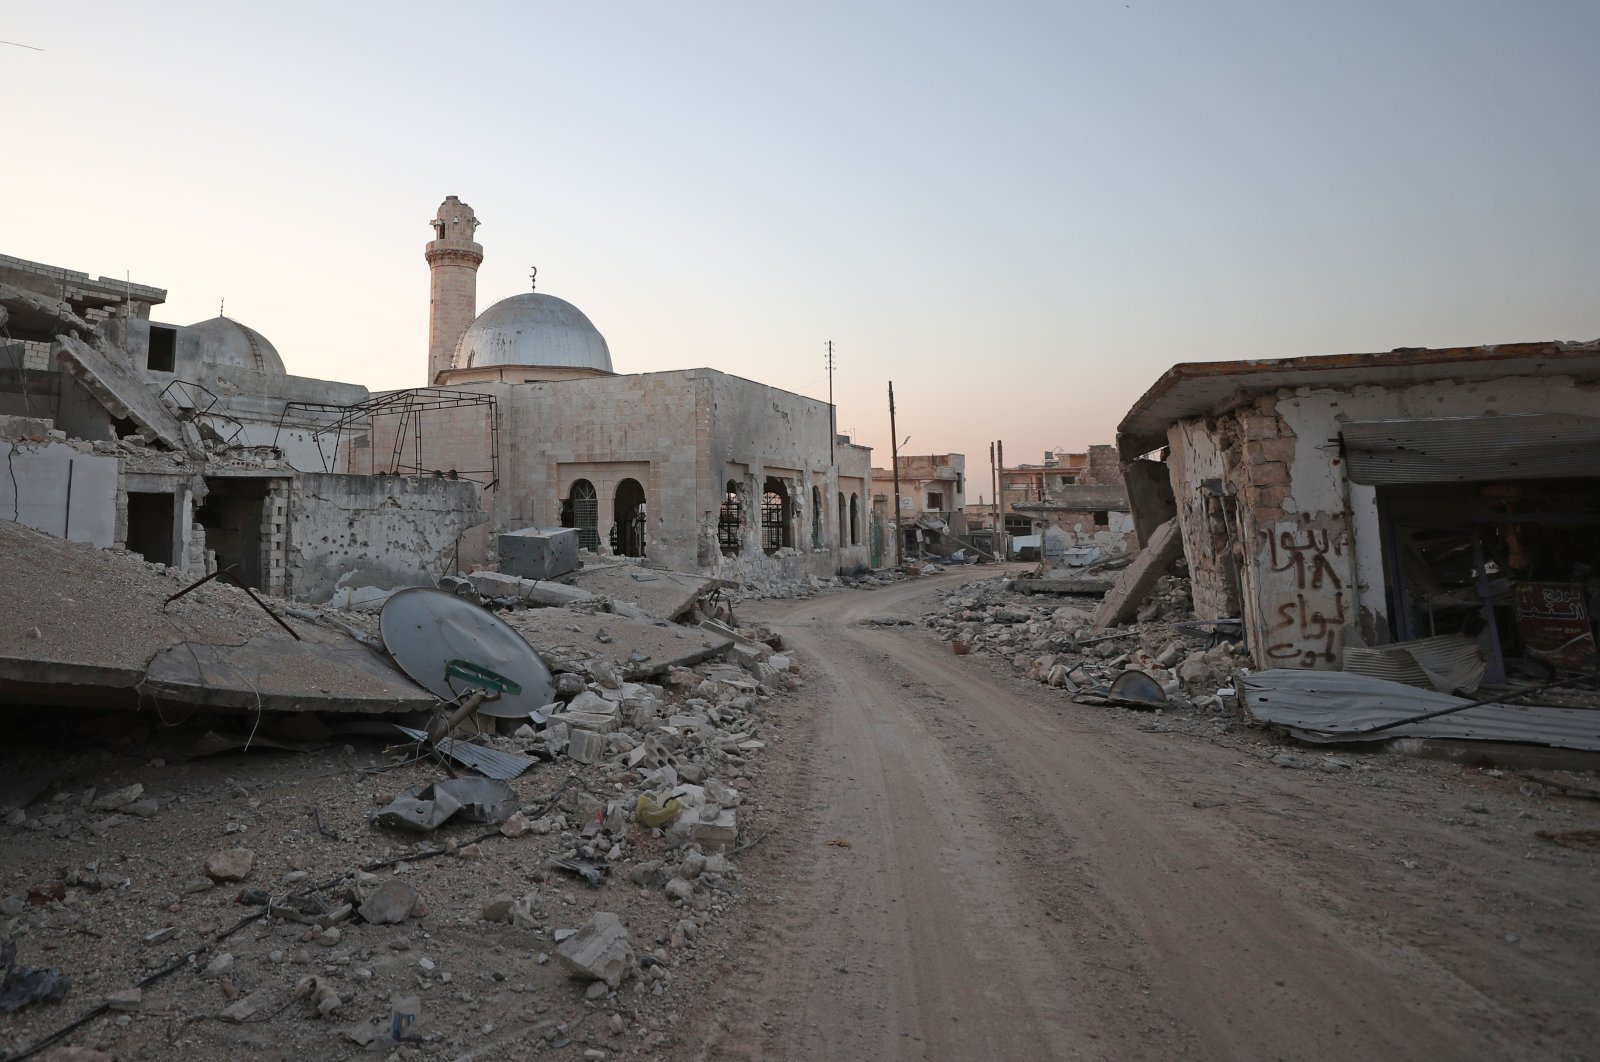 A picture taken on March 7, 2020, shows destruction in the village of al-Nayrab, about 14 kilometers (8.7 miles) southeast of the city of Idlib in northwestern Syria. (AFP Photo)